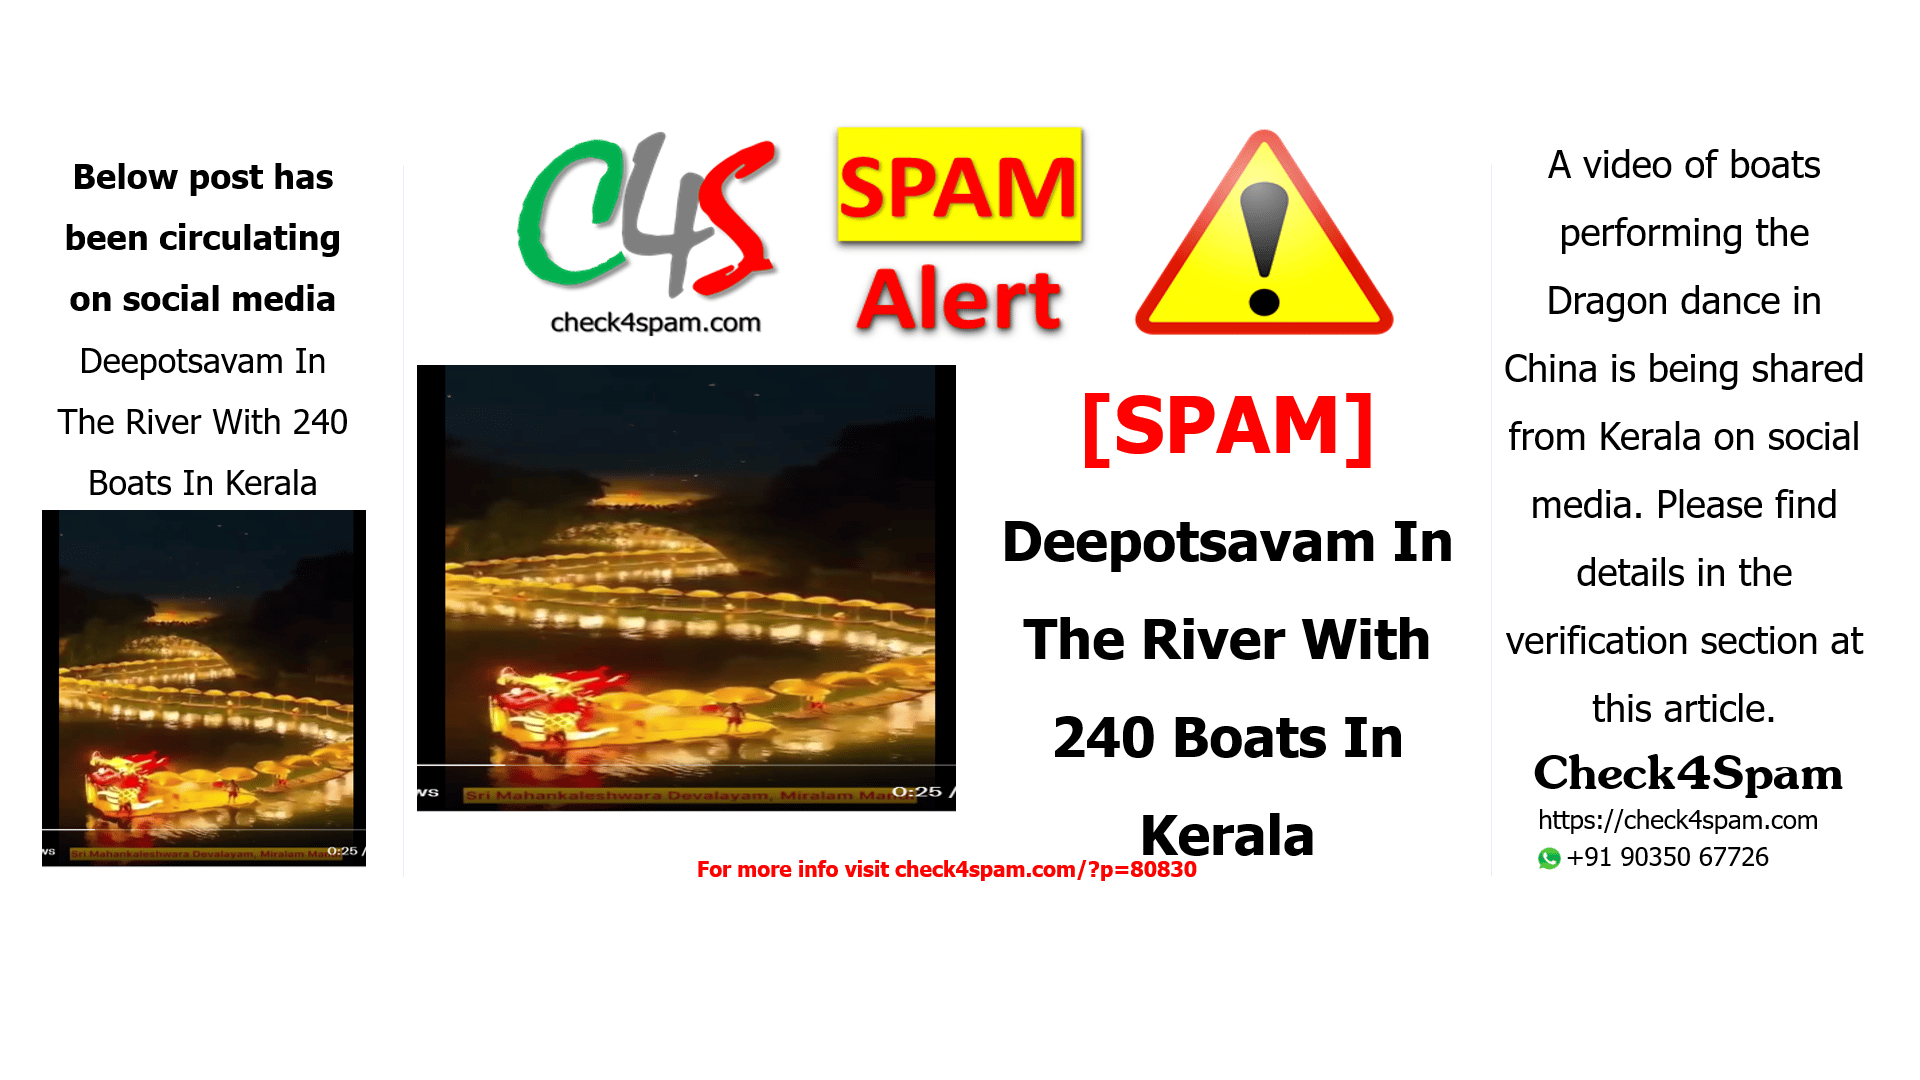 Deepotsavam In The River With 240 Boats In Kerala